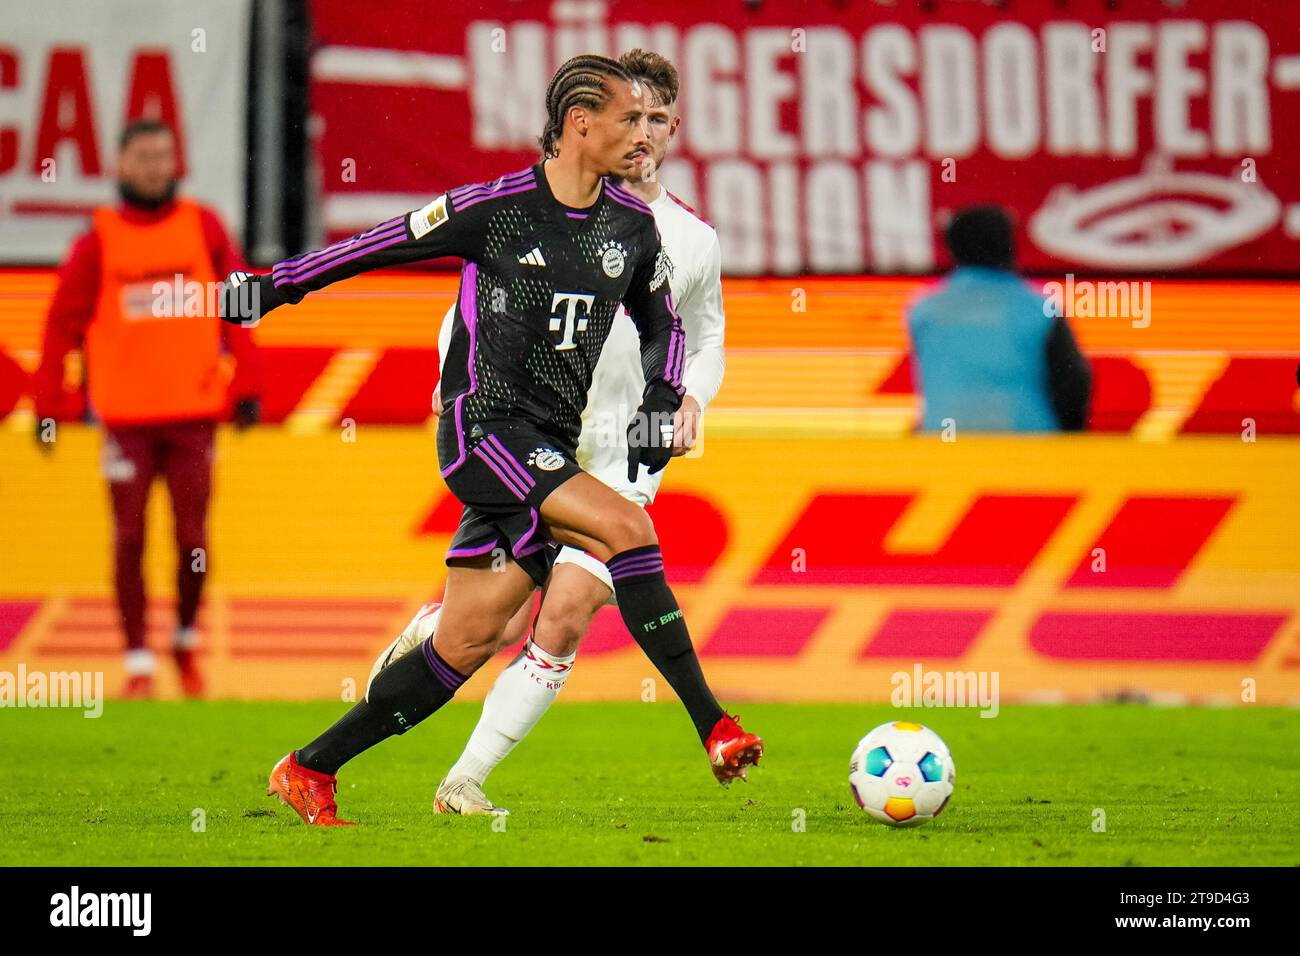 Cologne, Germany. 24th Nov, 2023. COLOGNE, GERMANY - NOVEMBER 24: Leroy Sane of FC Bayern Munchen passes the ball during the Bundesliga match between 1. FC Koln and FC Bayern Munchen at the RheinEnergieStadion on November 24, 2023 in Cologne, Germany. (Photo by Rene Nijhuis/BSR Agency) Credit: BSR Agency/Alamy Live News Stock Photo